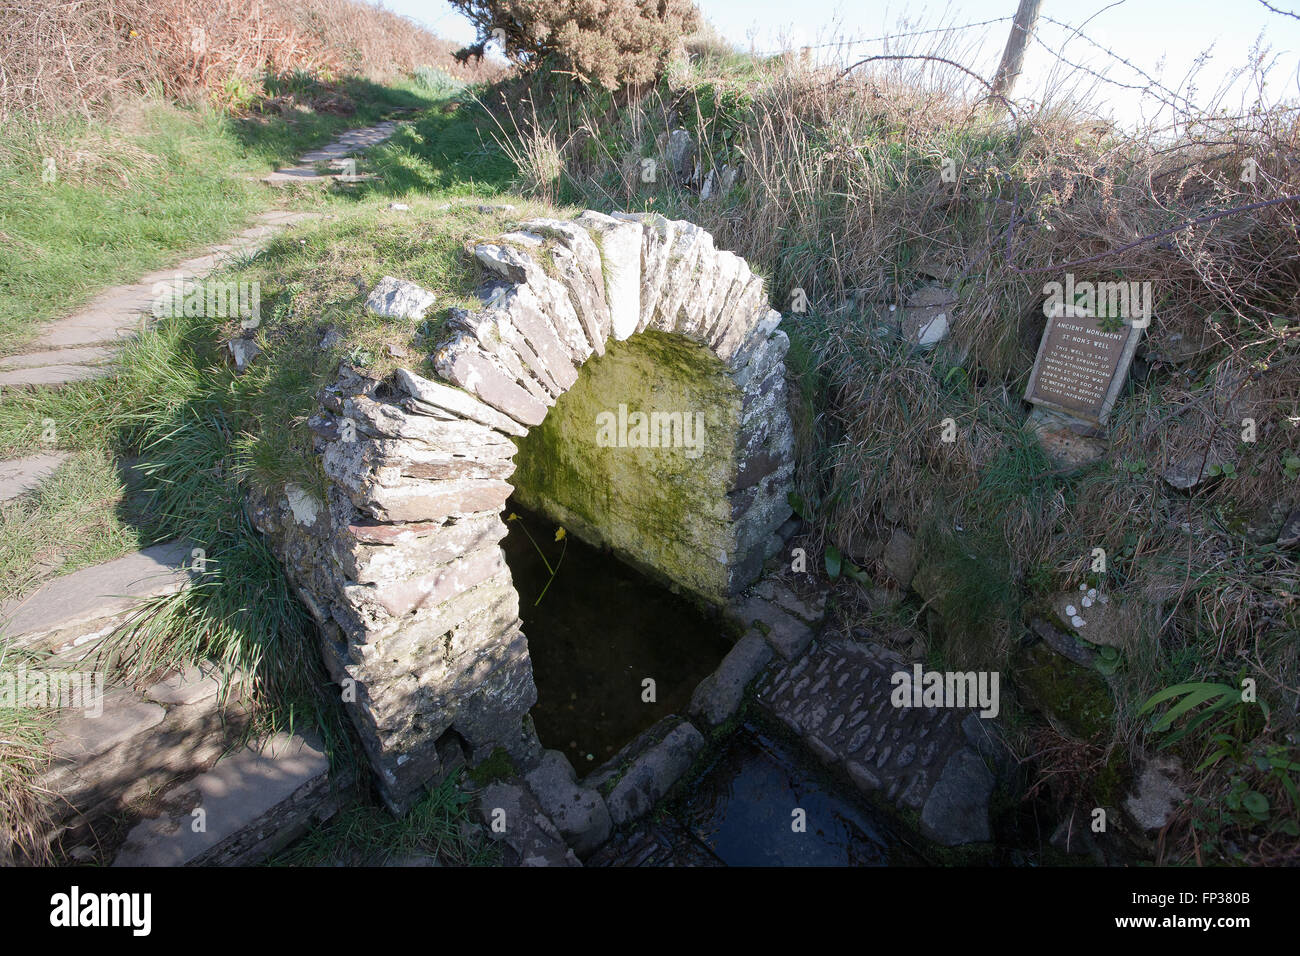 At, St Non's Well, (the mother of patron saint St. David who was born at this spot) St Non's,Holy Well, was a famous healing well, Stock Photo